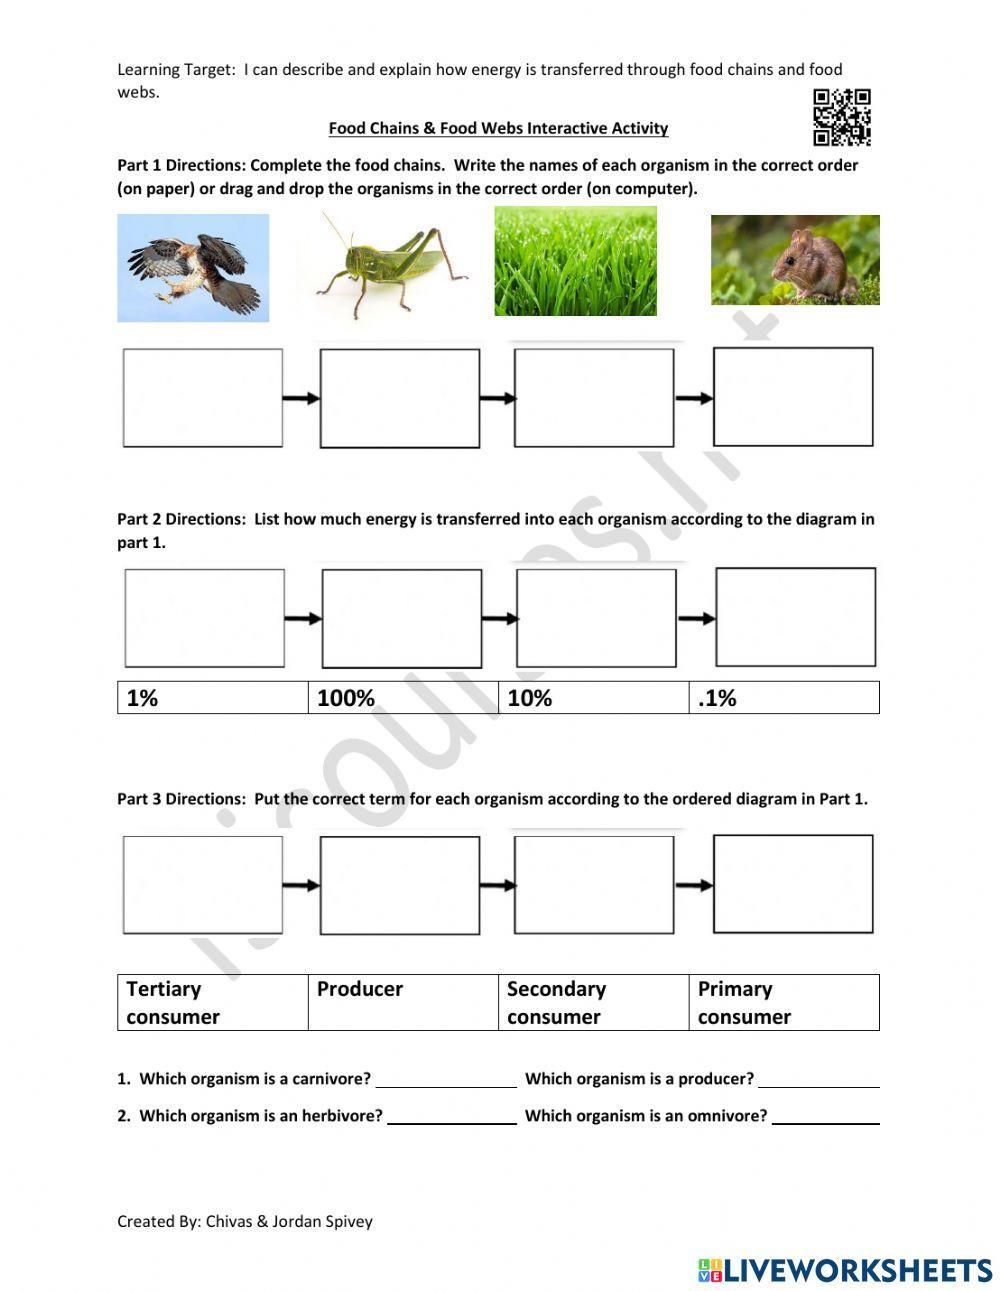 Food Chains - Food Webs Interactive Activity